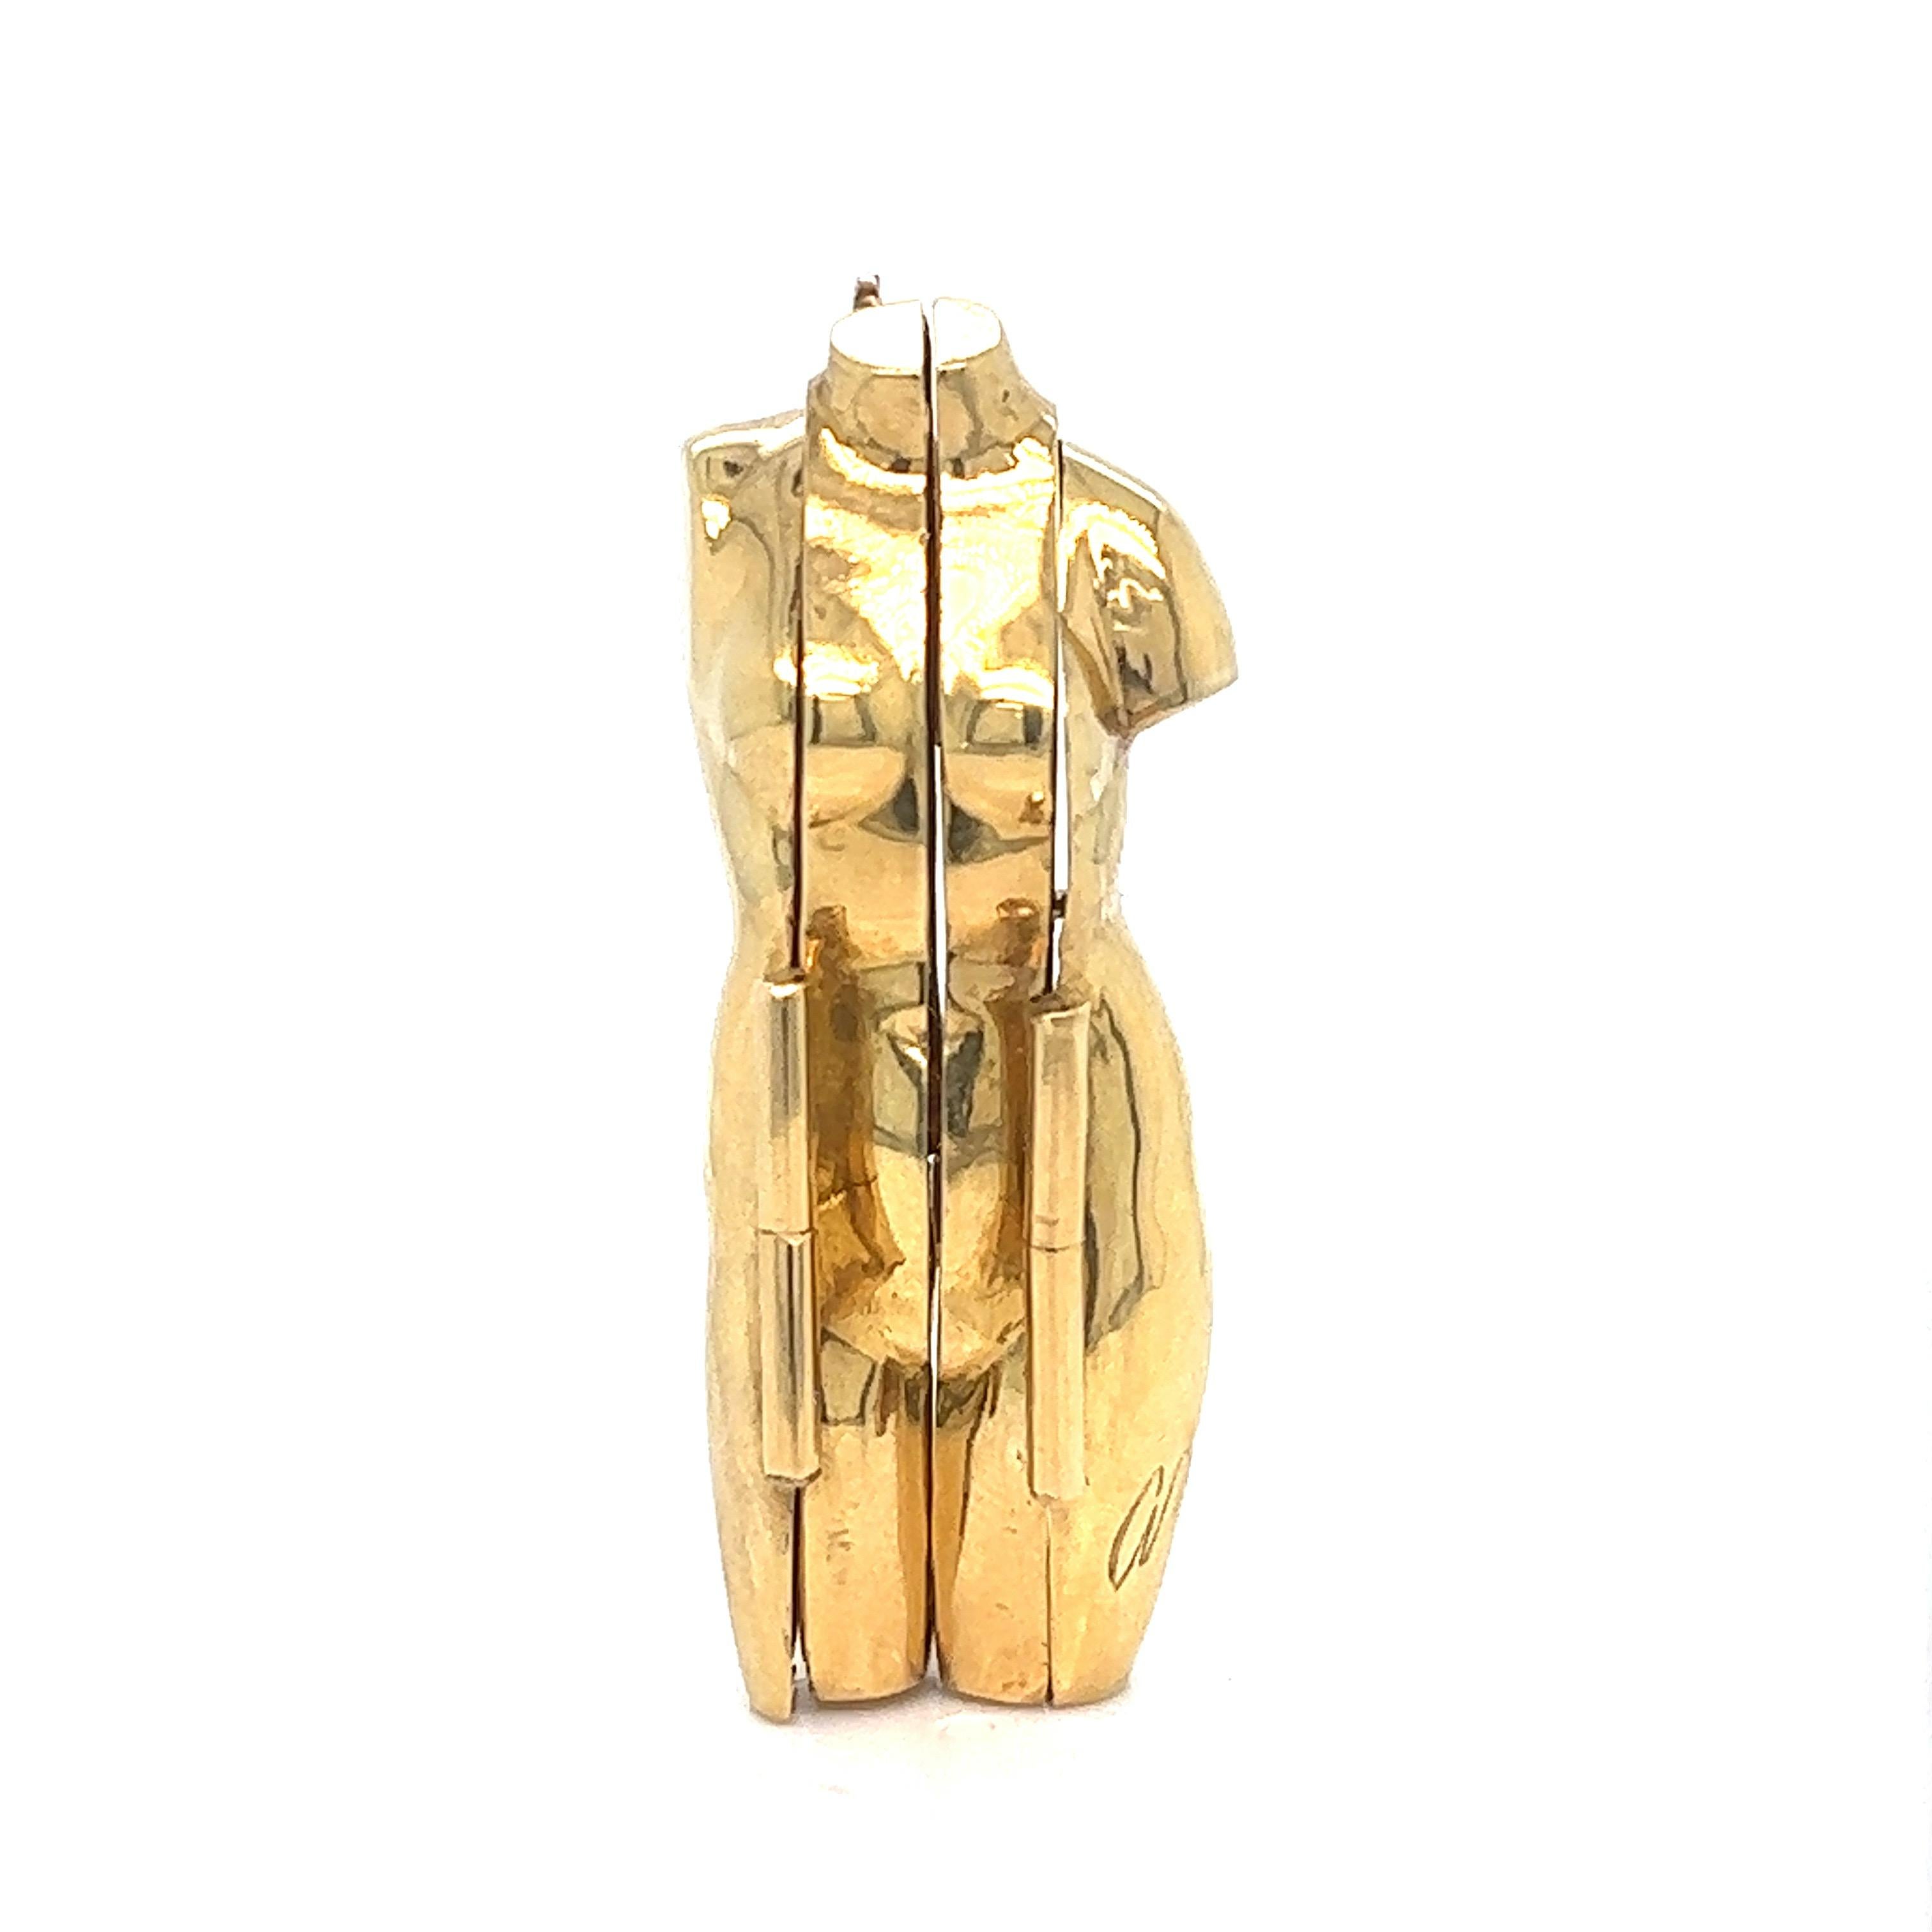 Contemporary Arman Sculptural Deconstructed Woman's Body Edition 2/8 For Sale